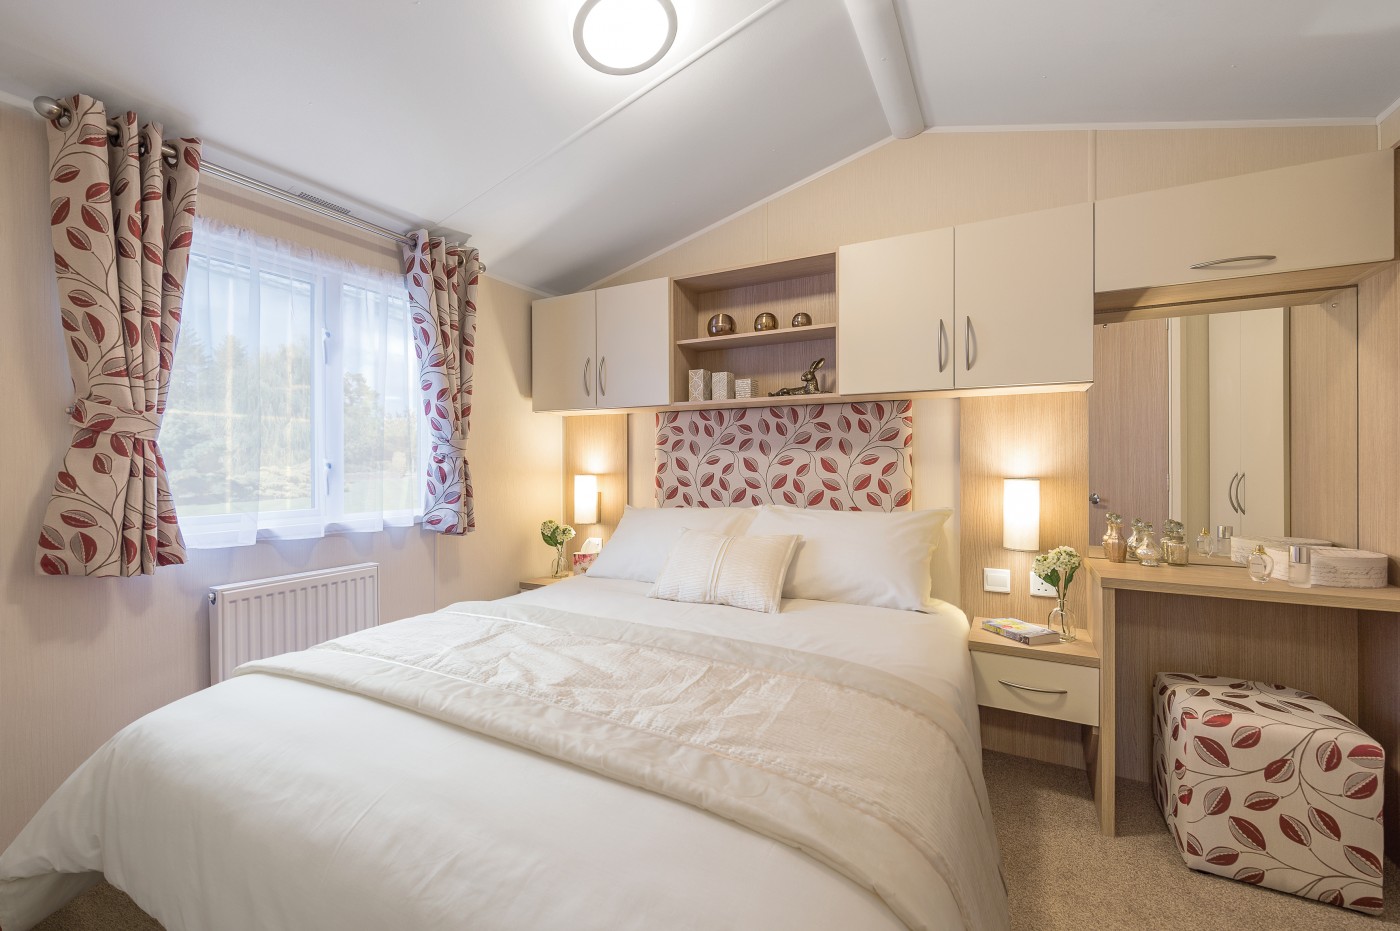 The 2016 Willerby Brockenhurst offers views of the grassy park from the large windows. It has two bedrooms and an open plan kitchen/living room layout. 
Bedroom 1 – Double
Bedroom 2 – Twin